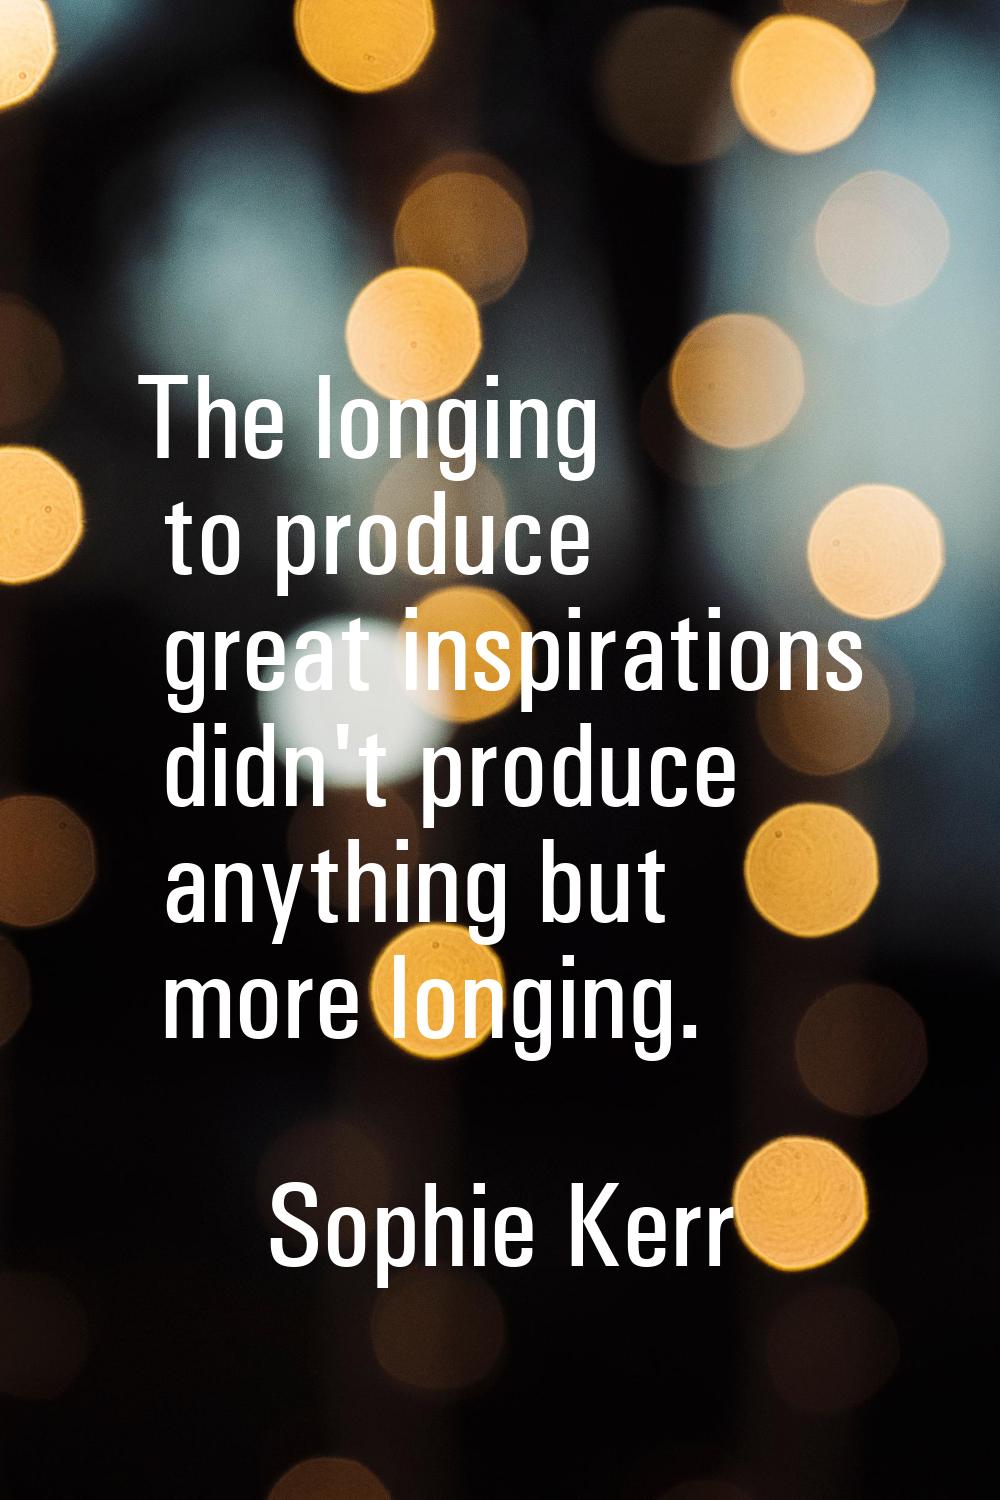 The longing to produce great inspirations didn't produce anything but more longing.